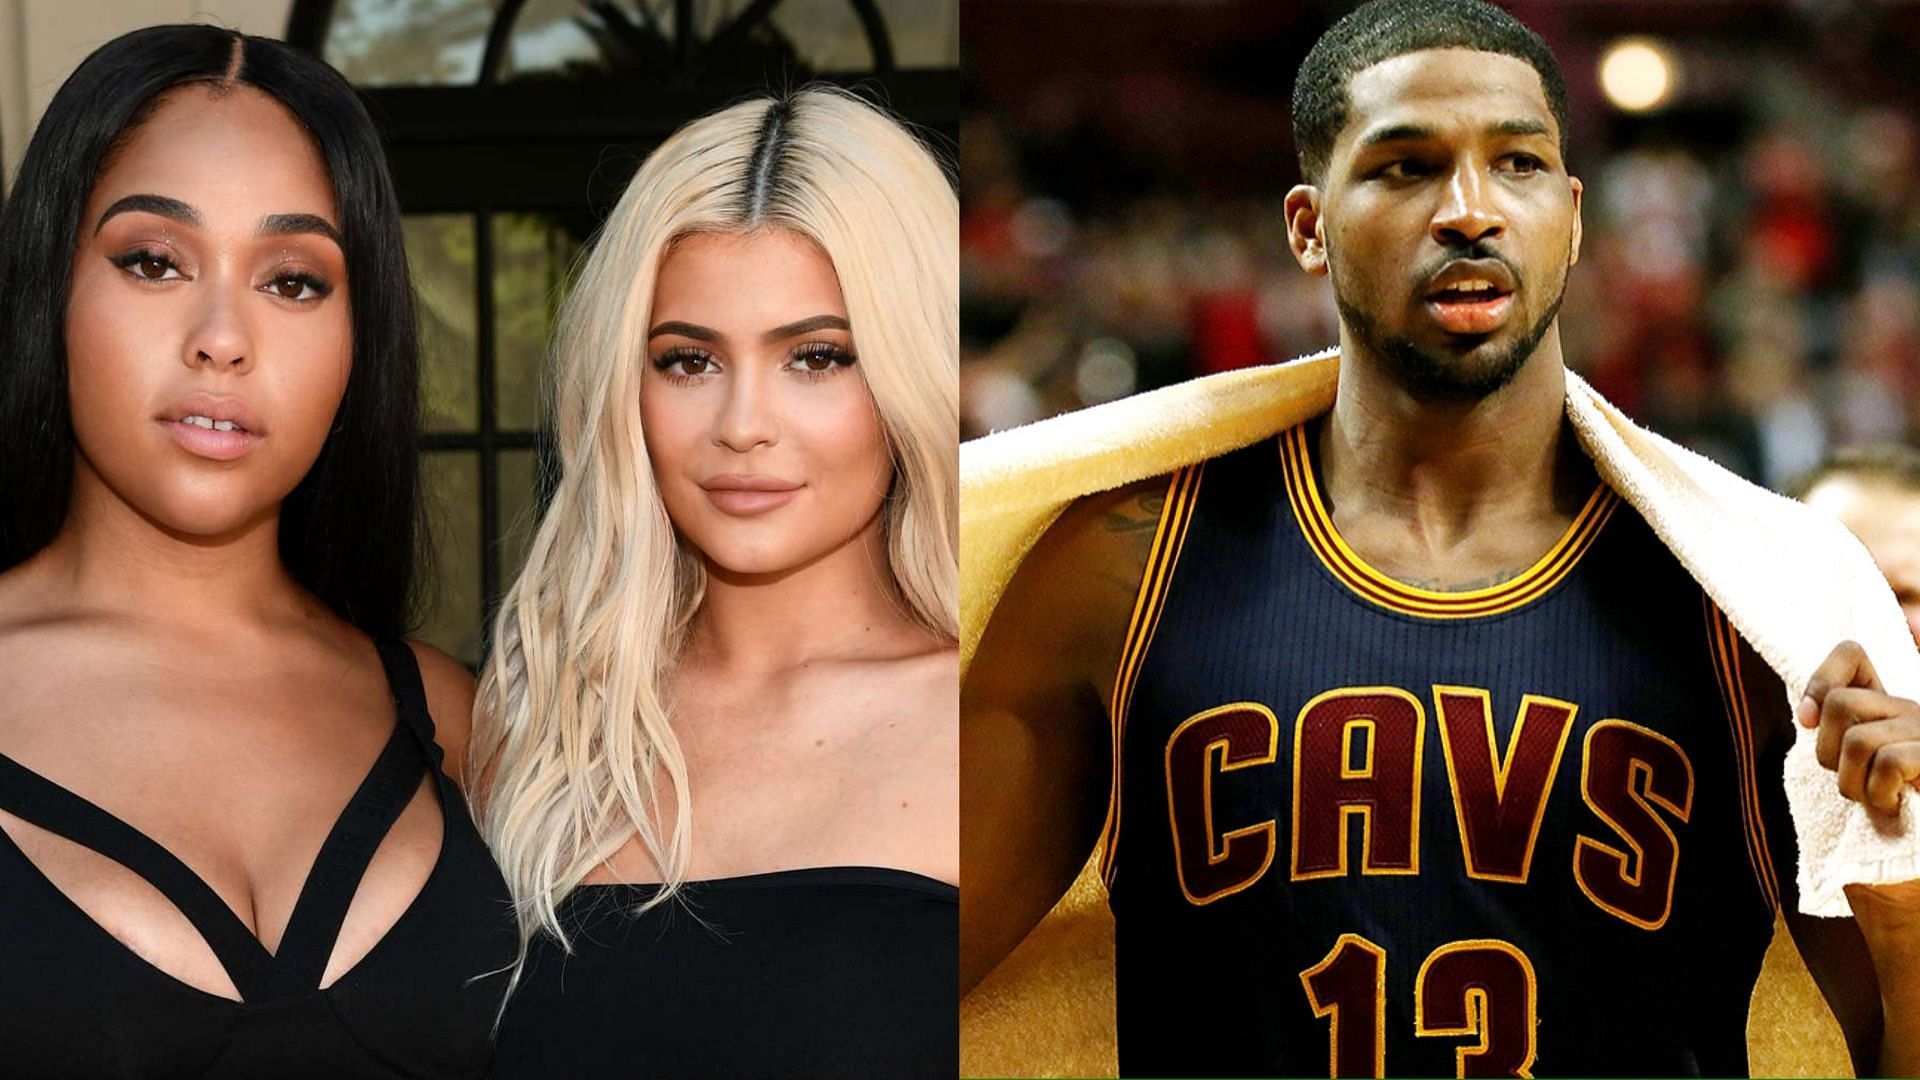 Kylie Jenner and Jordyn Woods have reconciled after the Tristan Thompson cheating scandal